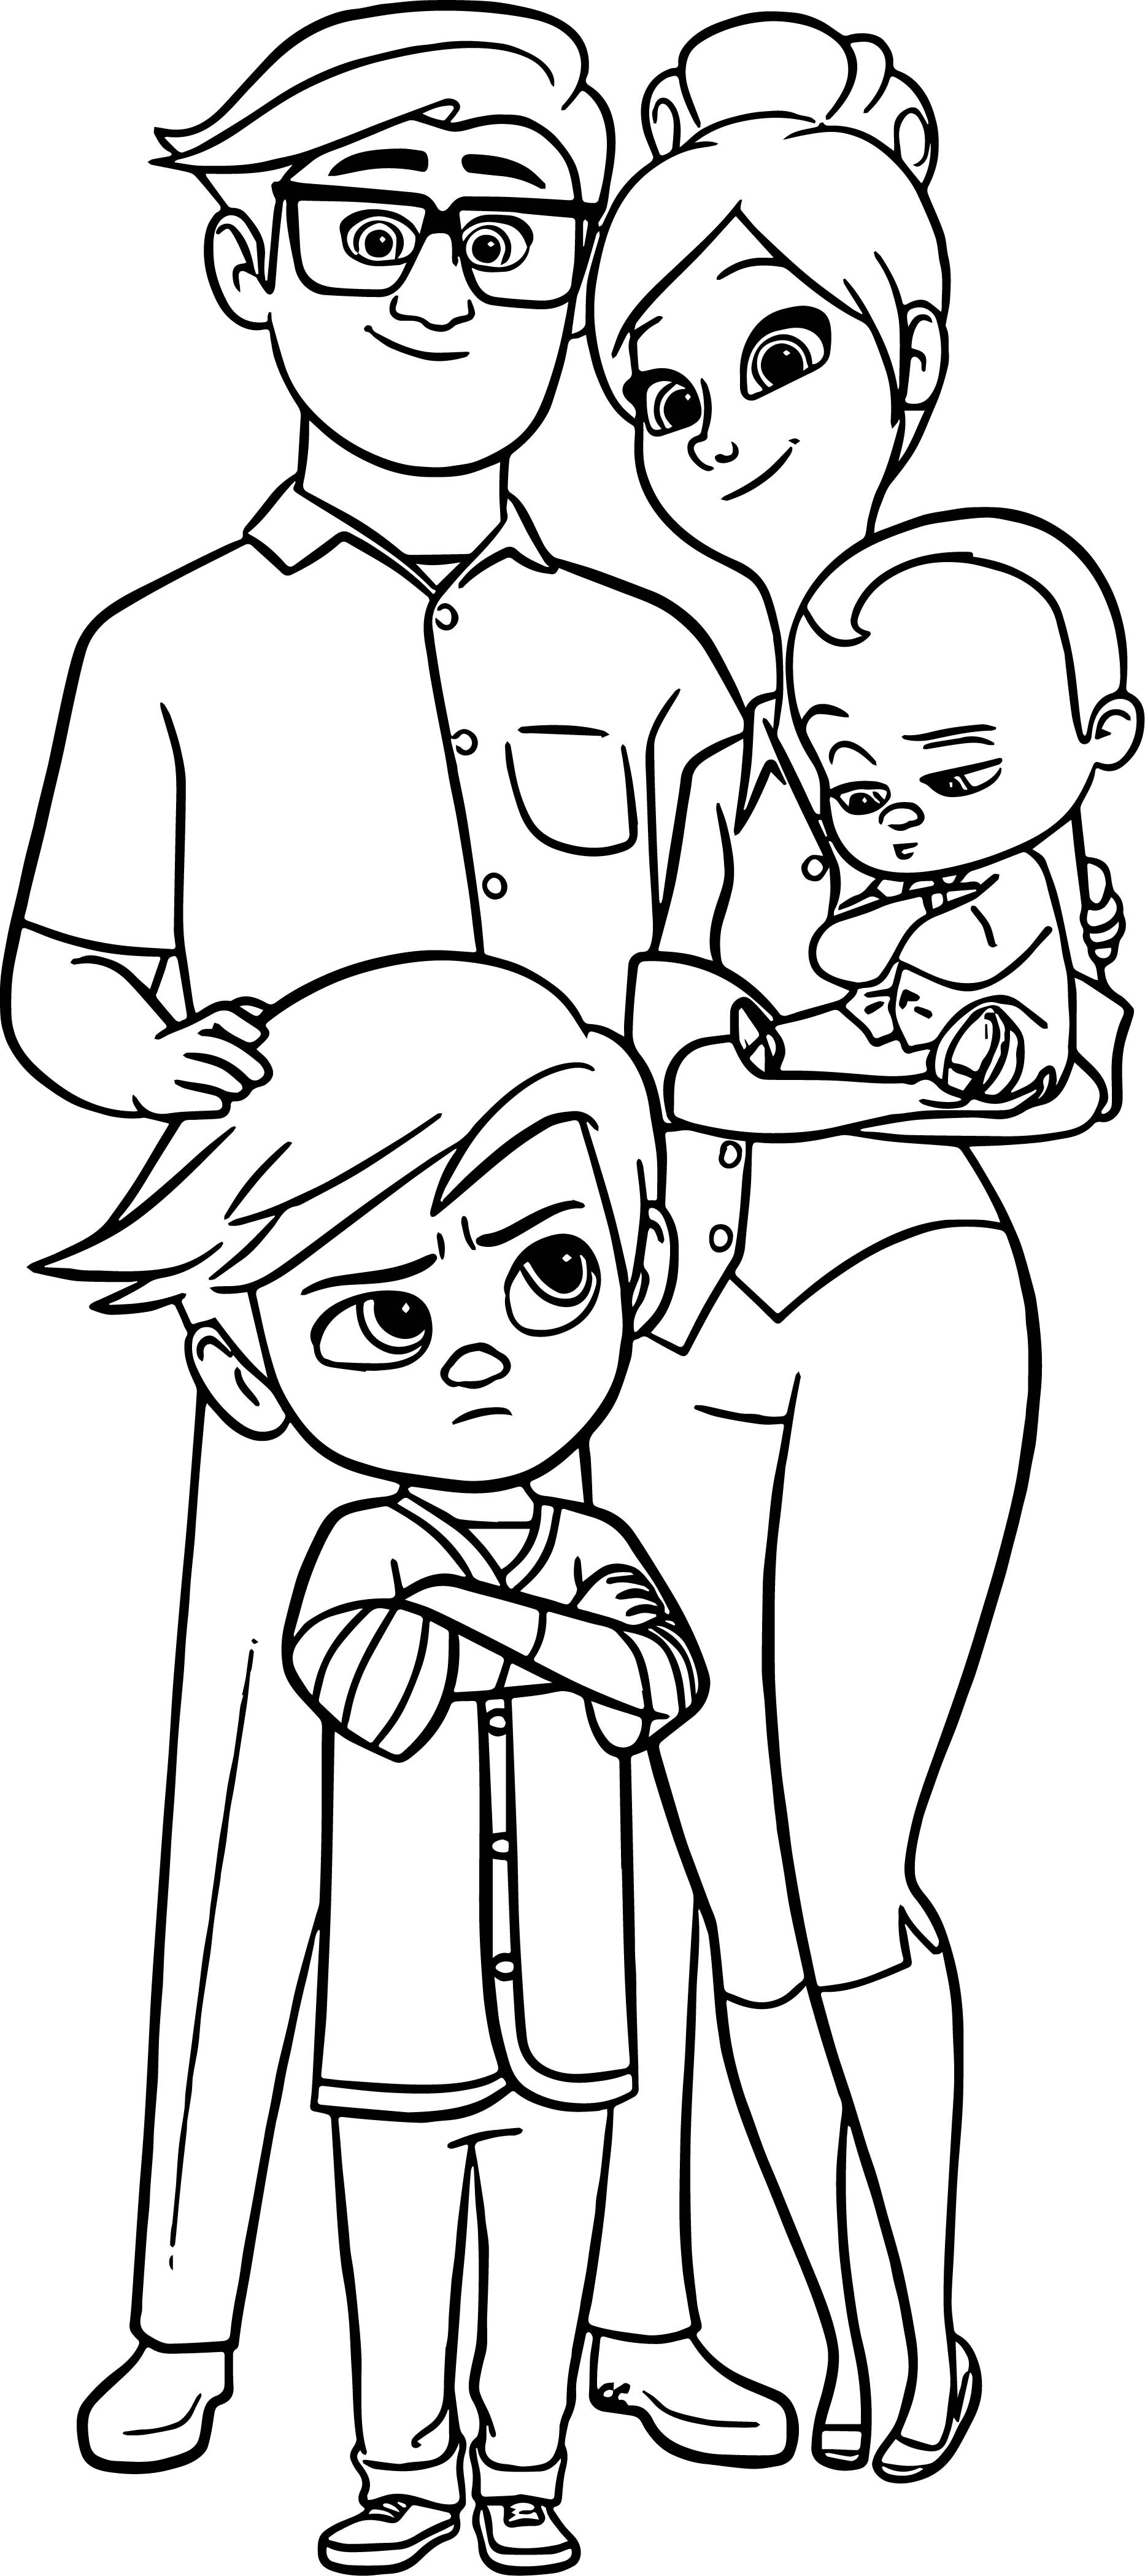 Baby Boss Coloring Pages
 The Boss Baby Family Coloring Page